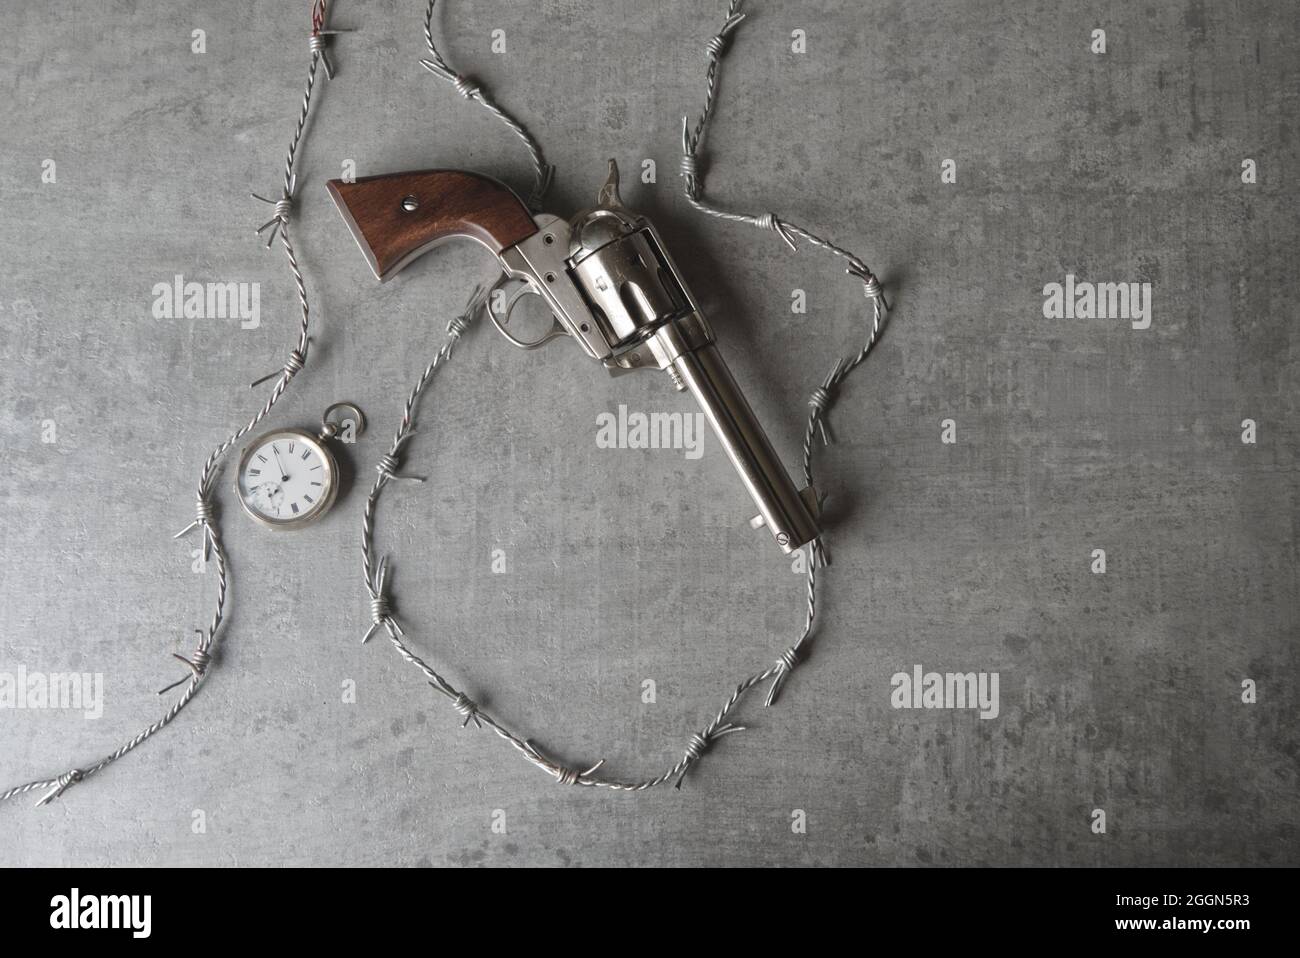 cowboy pistol, colt, with barbed wire and a pocket watch still life Stock Photo